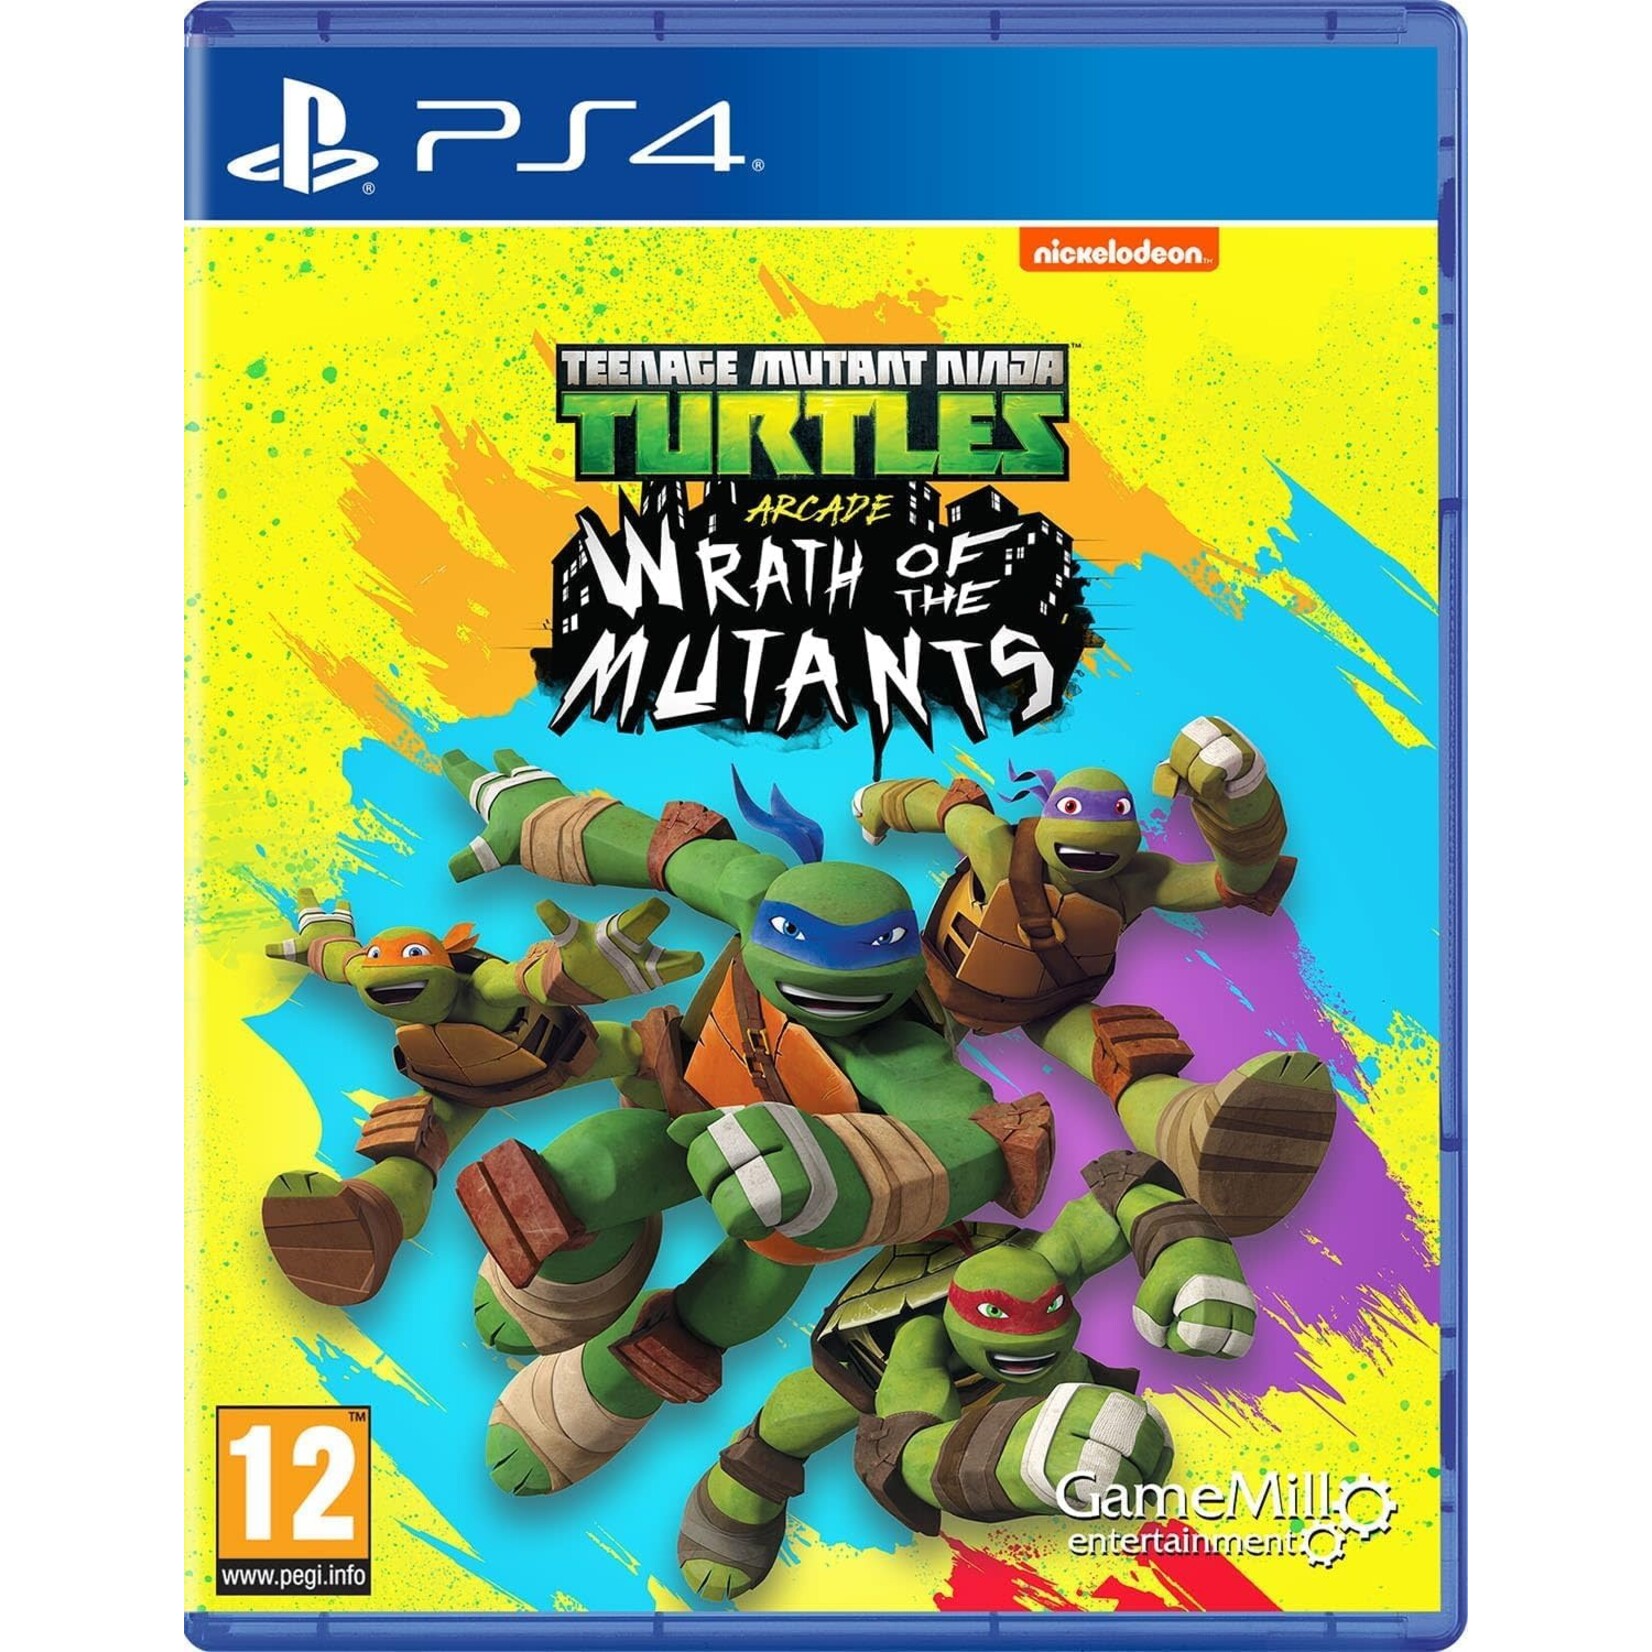 PS4-TMNT Wrath of the Mutants